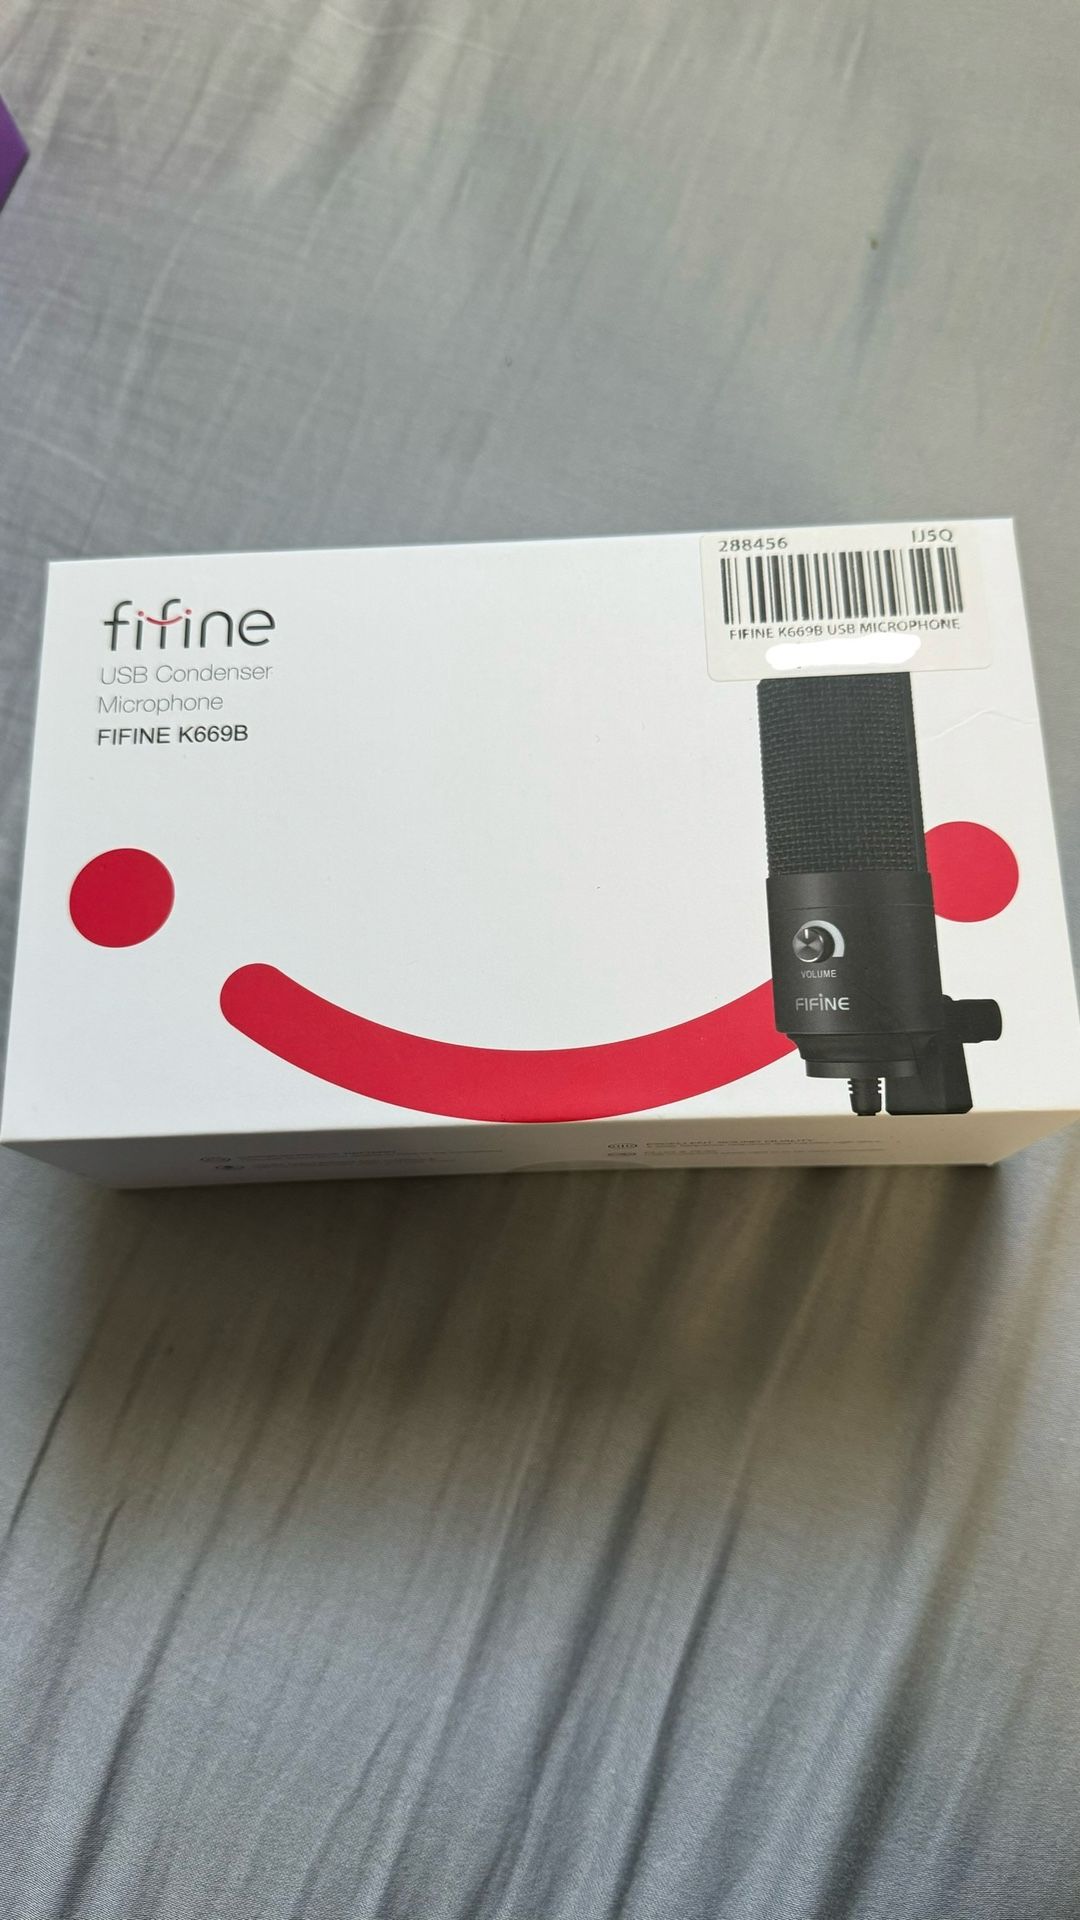 Fifine USB Condenser Microphone NEW Sealed Box